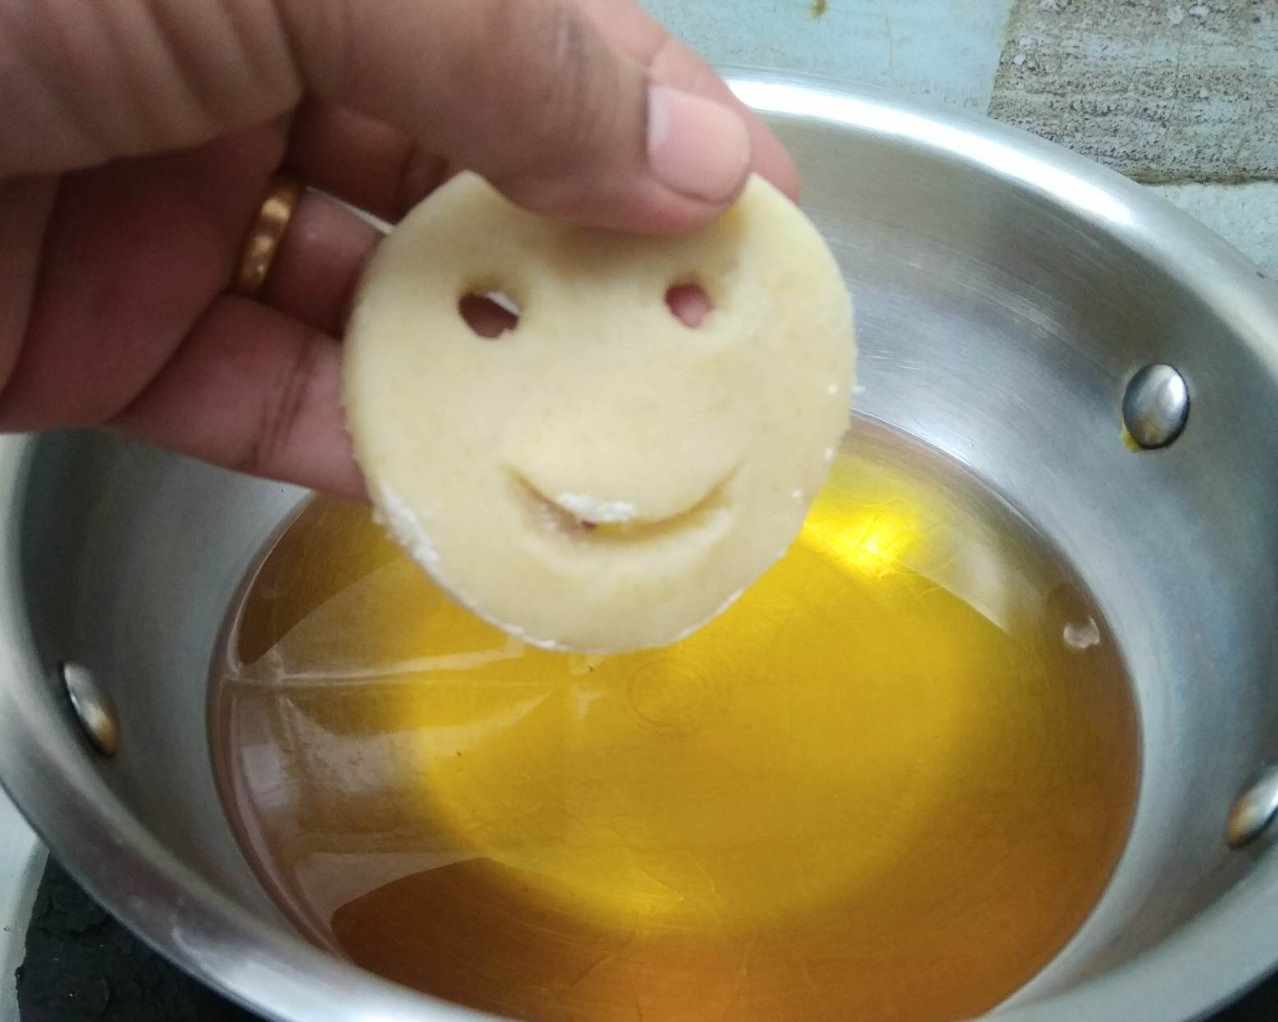 How to fry the Potato Smiley